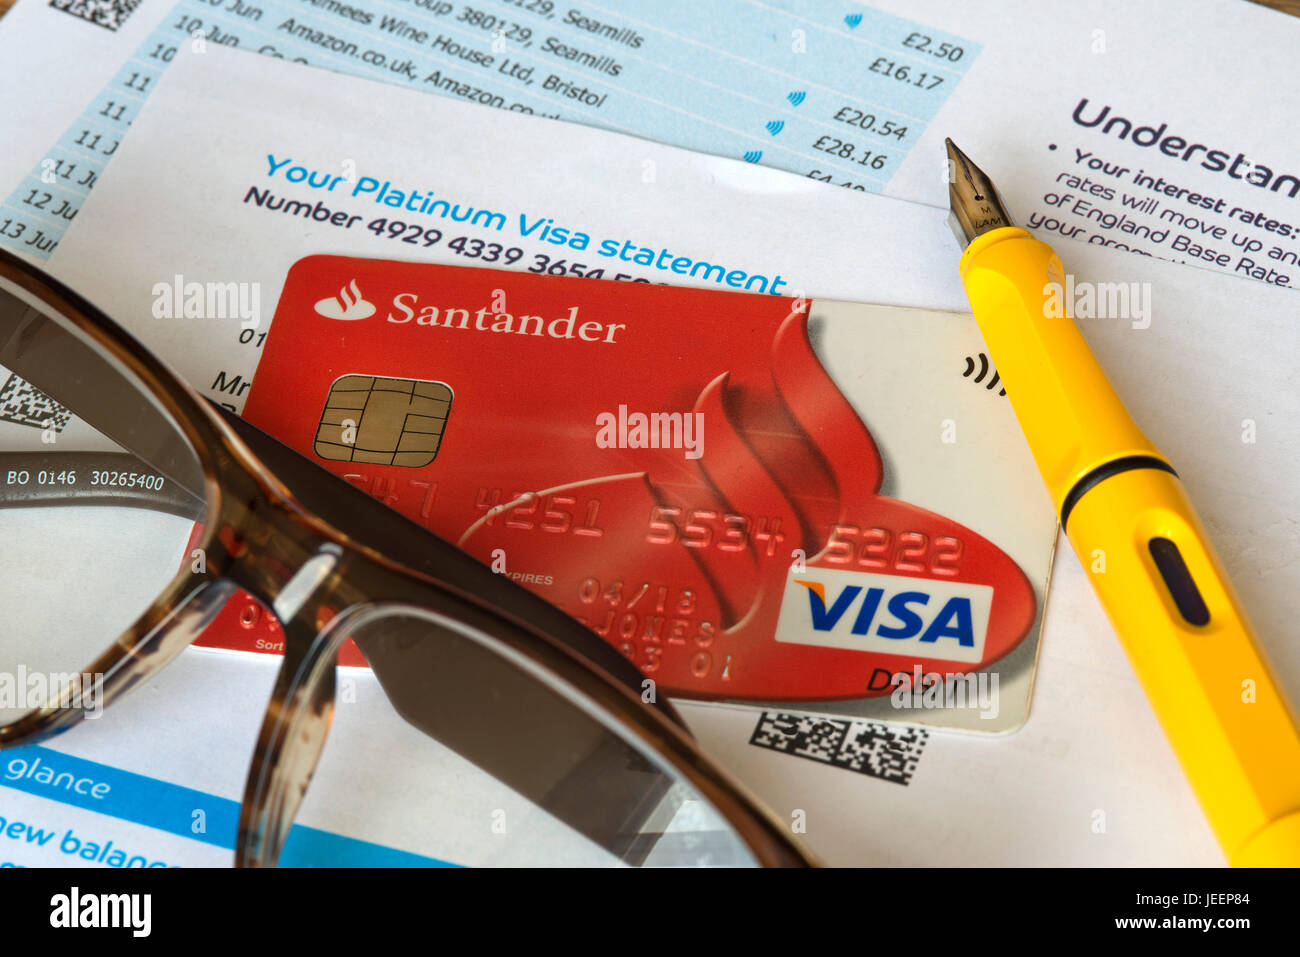 Santander debit card and Barclays Platinum Visa credit card statement with a pair of glasses and fountain pen. Stock Photo